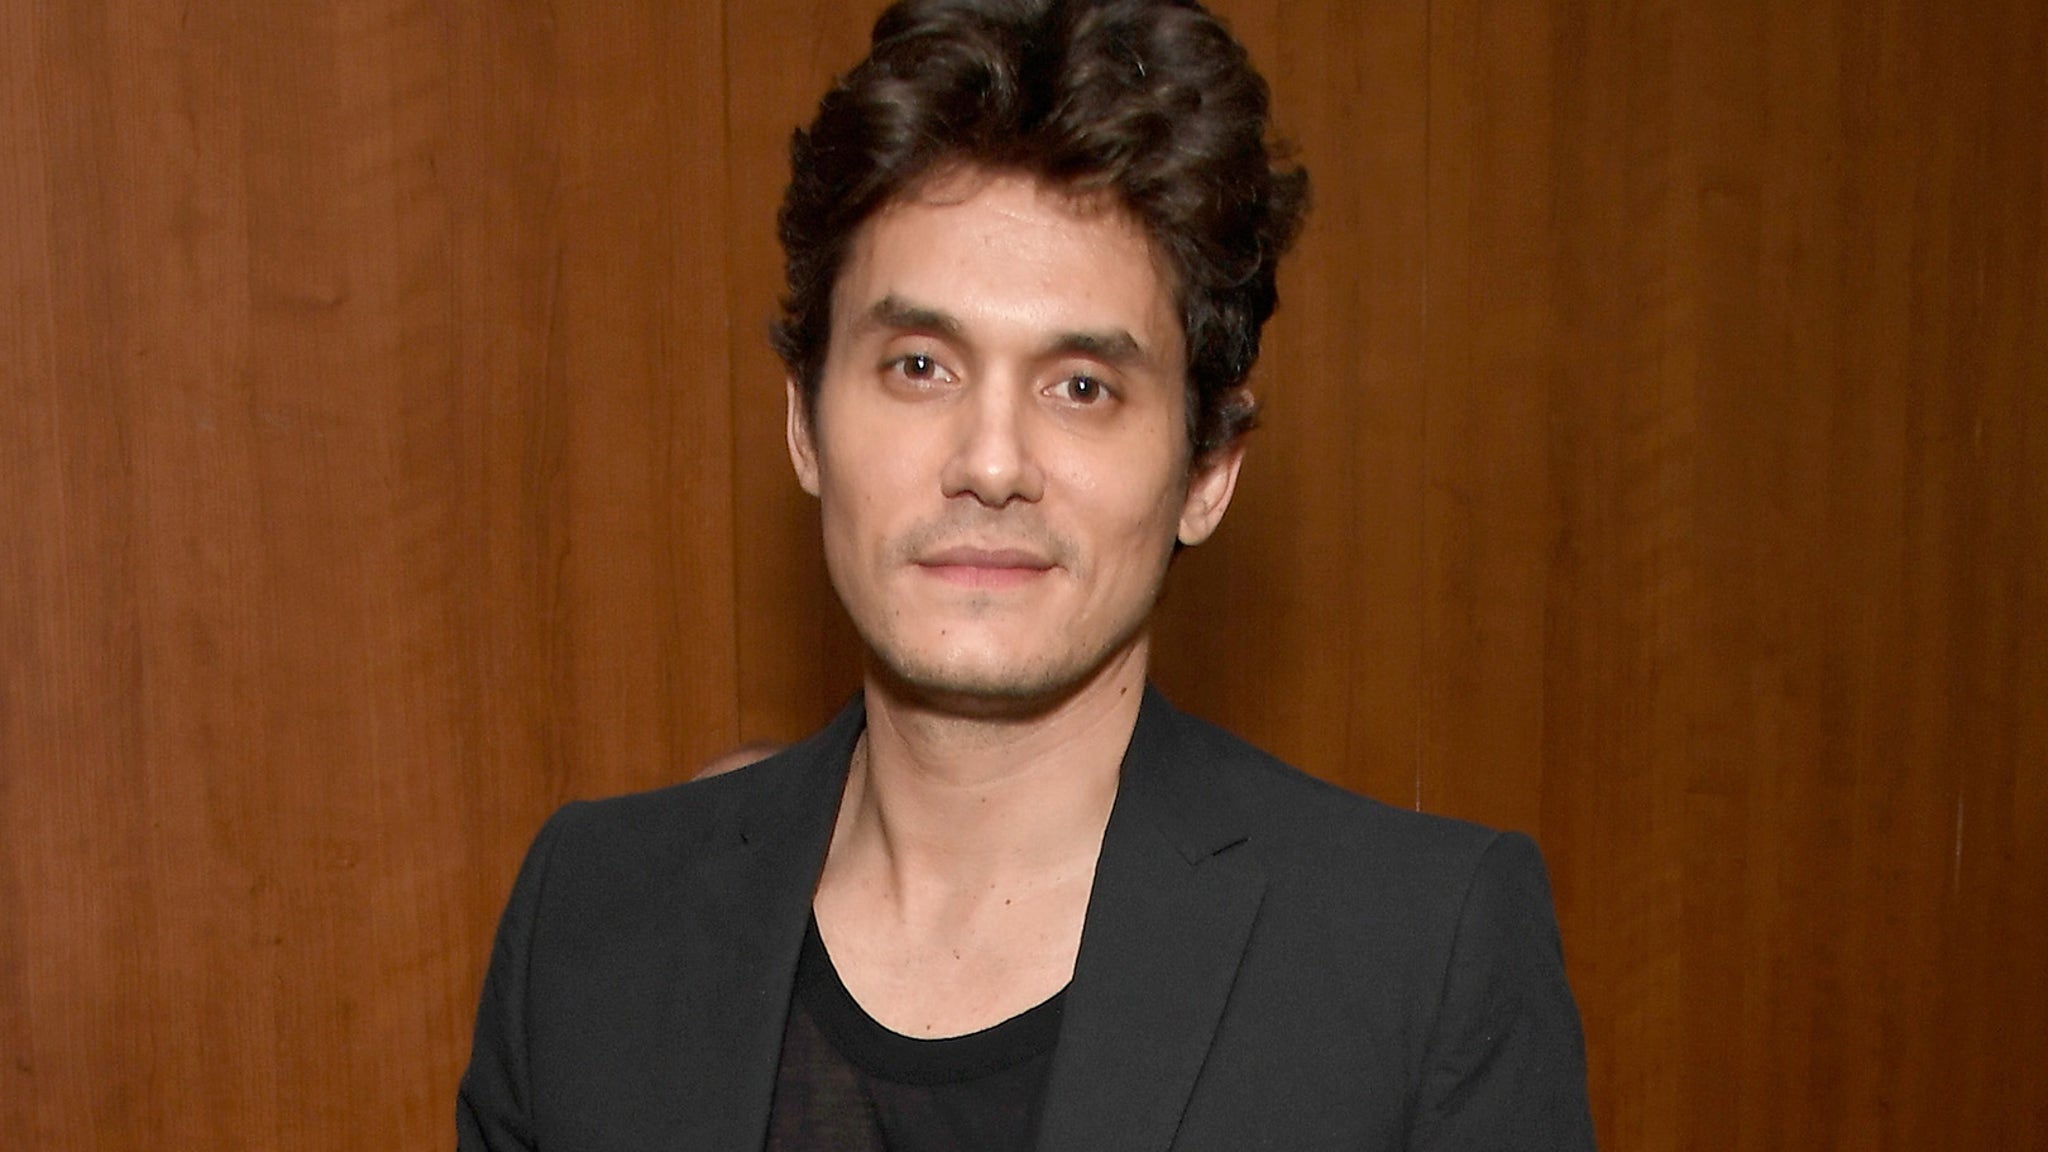 John Mayer on Settling Down, Britney Spears, And His Exes' Music: 'Man ...